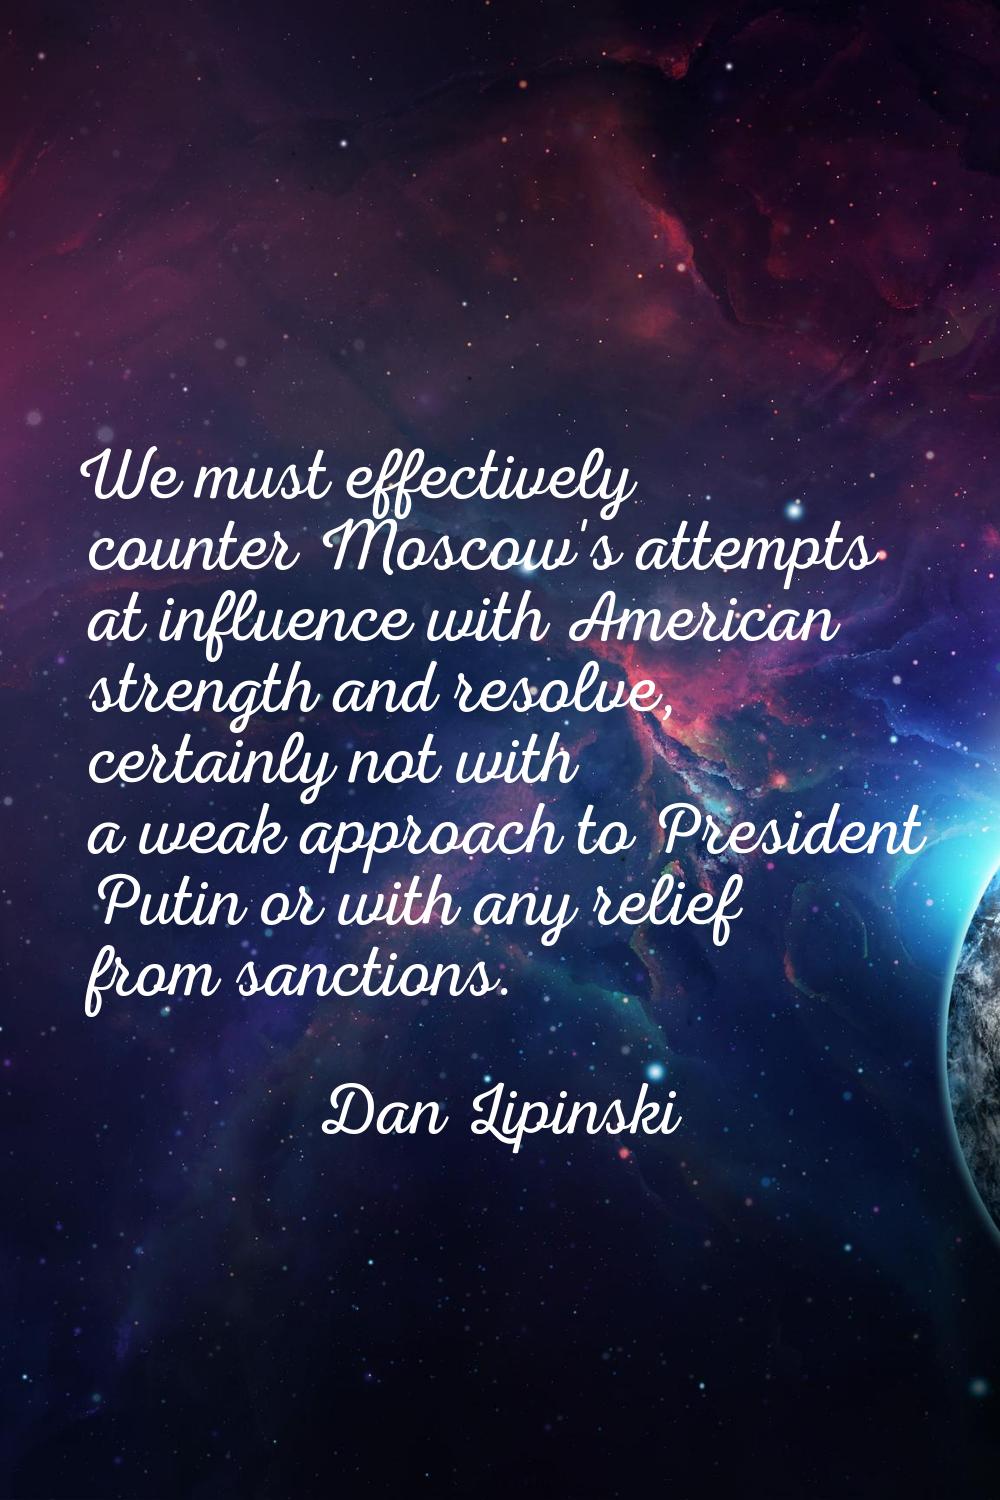 We must effectively counter Moscow's attempts at influence with American strength and resolve, cert